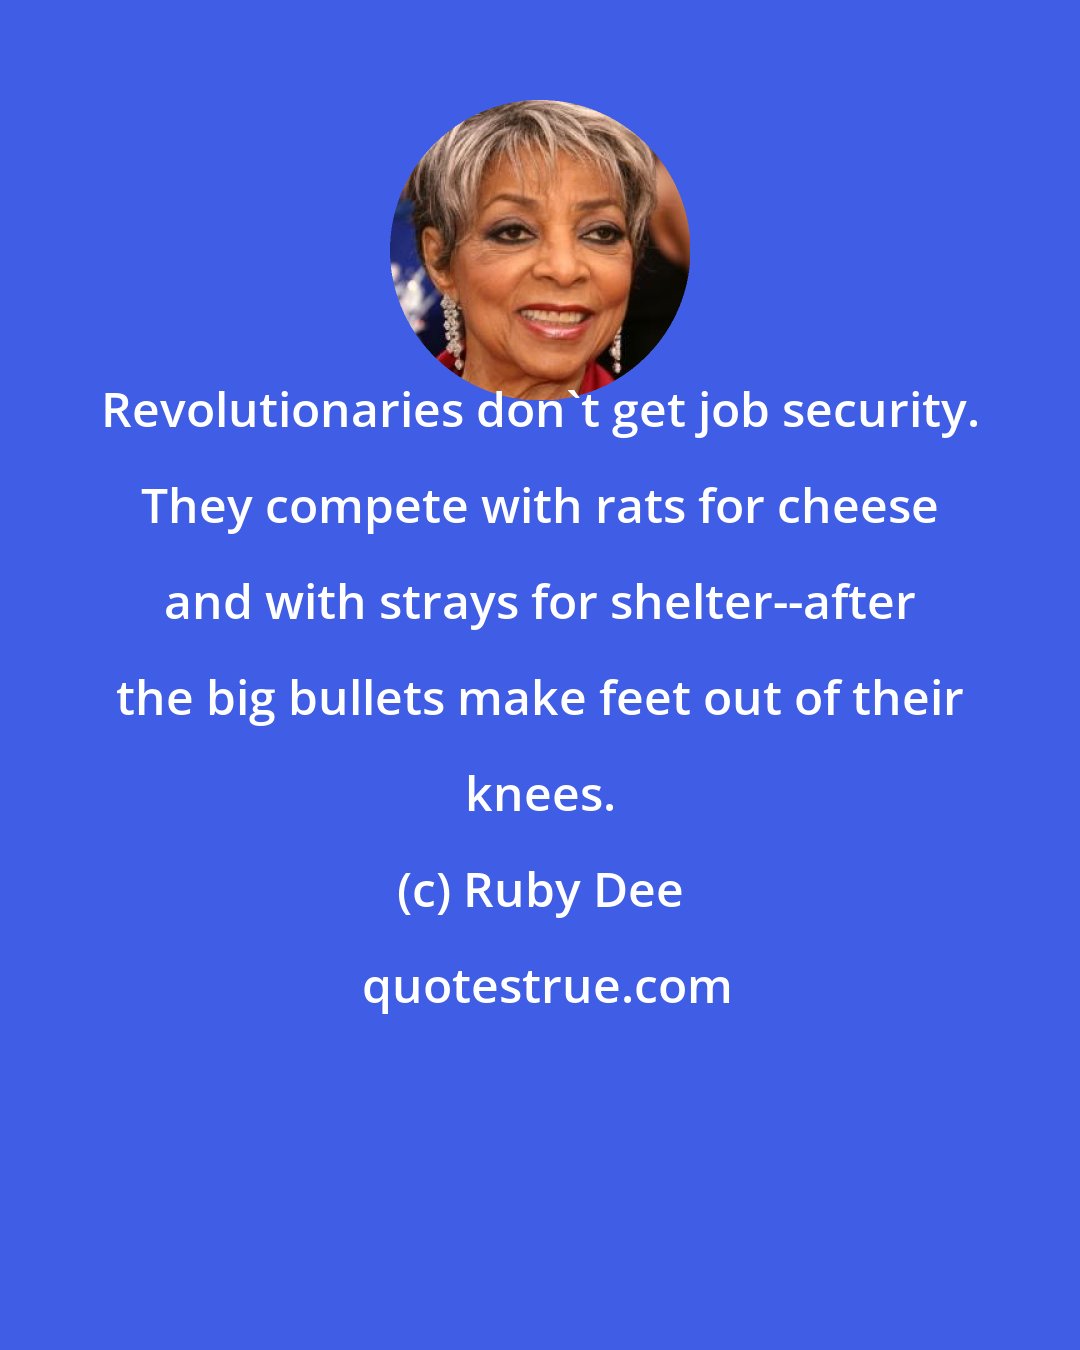 Ruby Dee: Revolutionaries don't get job security. They compete with rats for cheese and with strays for shelter--after the big bullets make feet out of their knees.